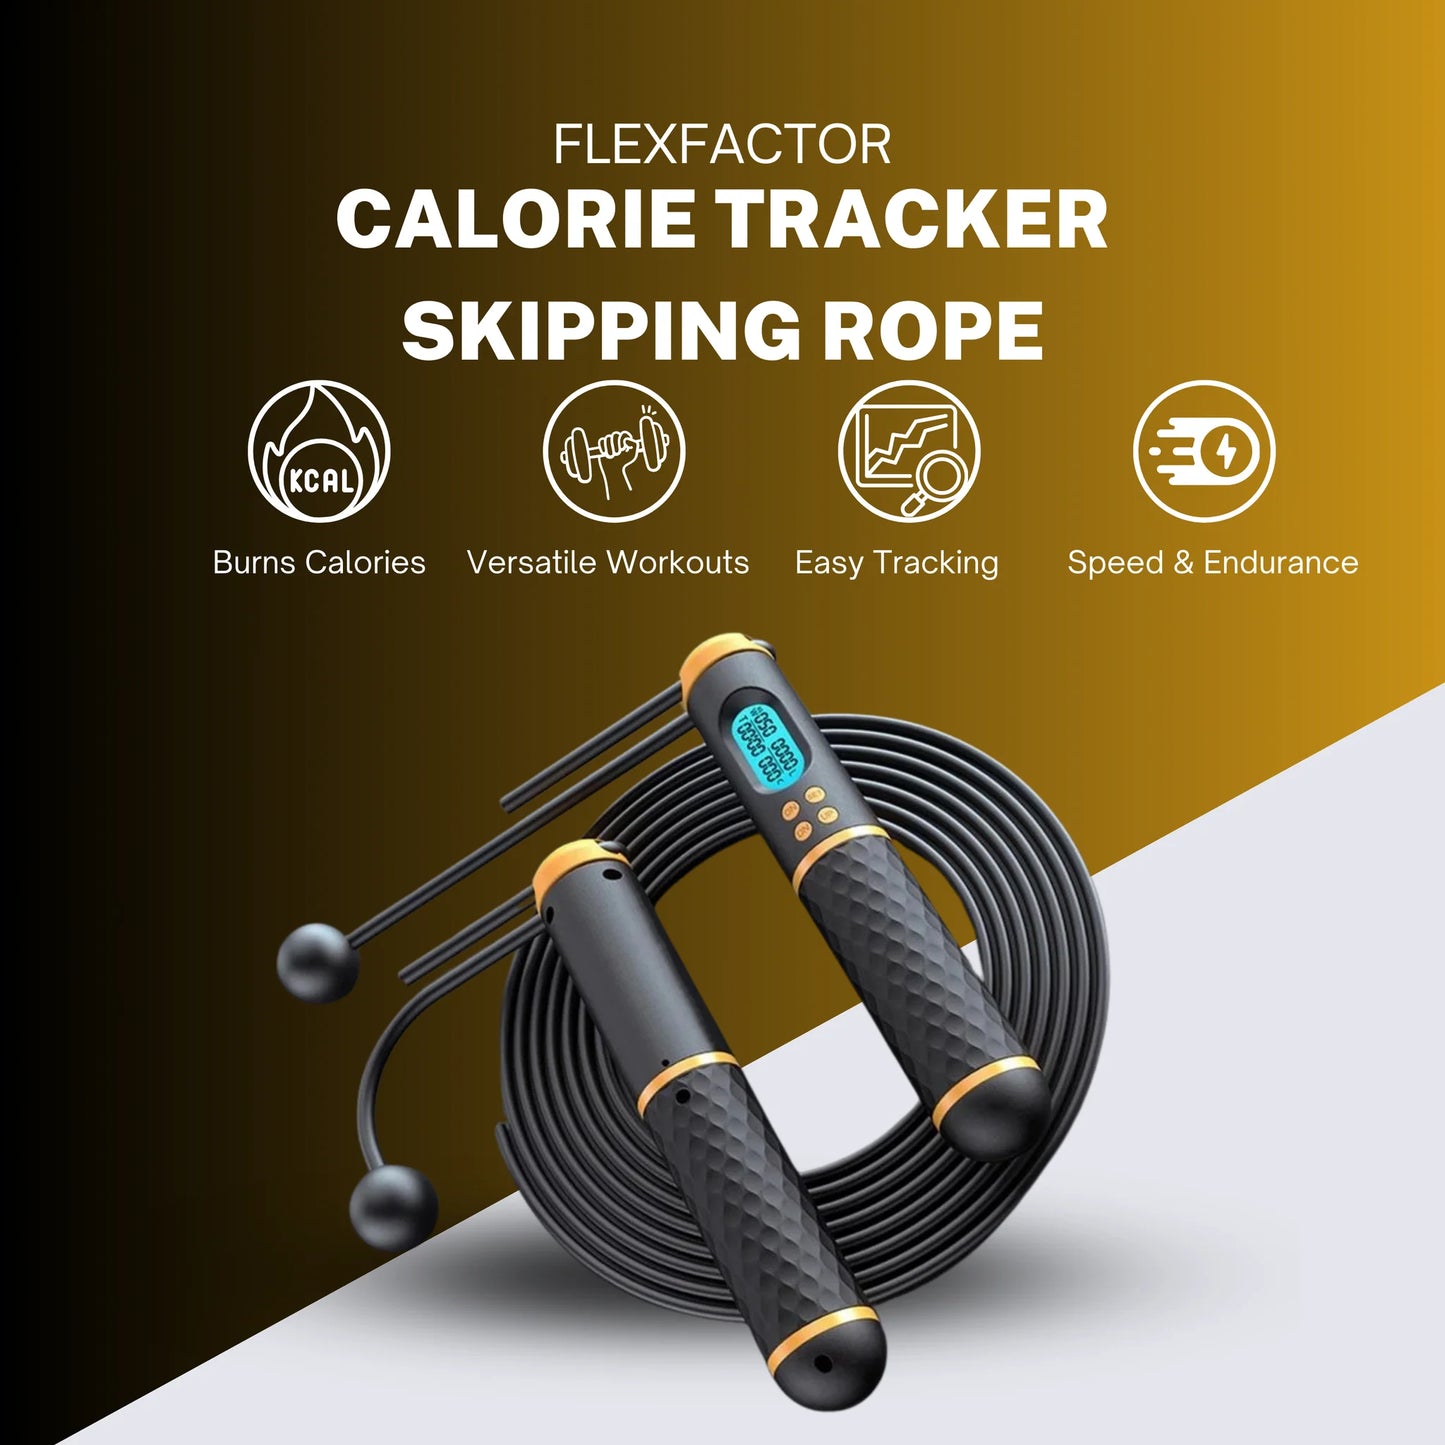 Calorie Tracker Skipping Rope